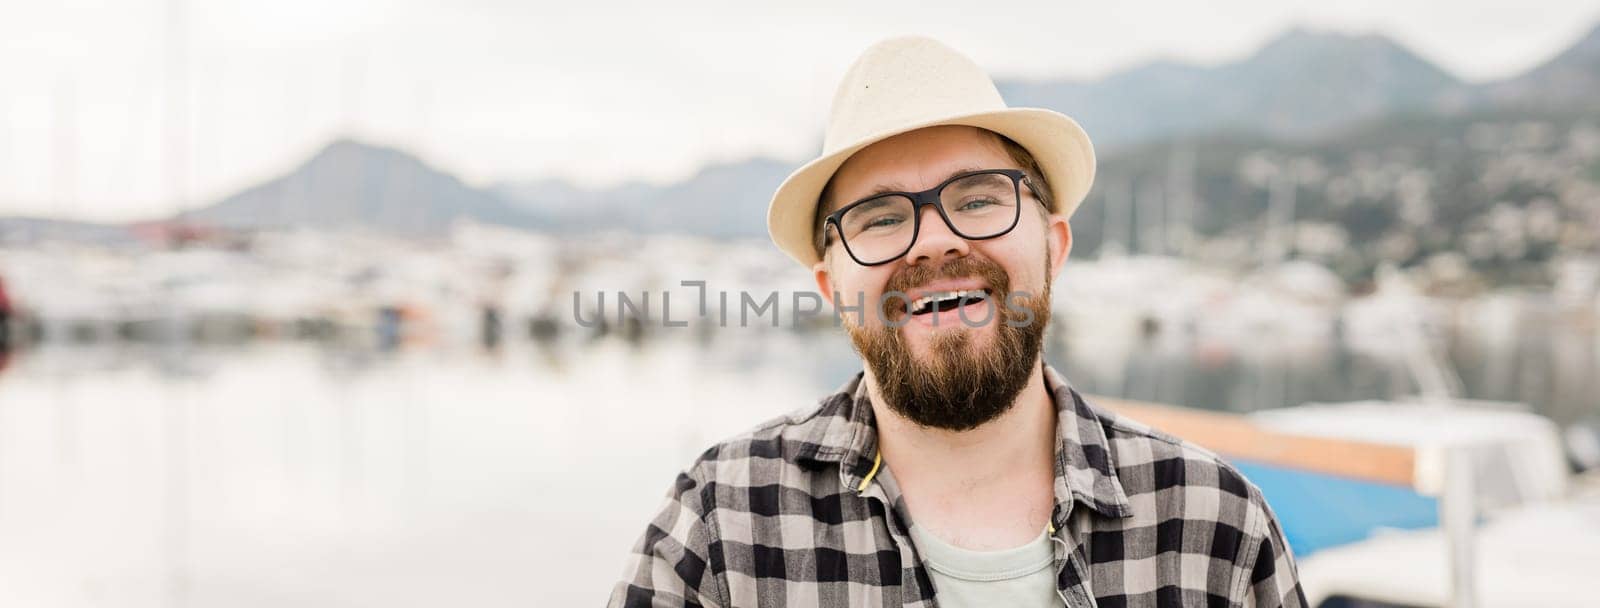 Banner millennial man wearing hat and glasses near marina with yachts. Portrait of laughing man with sea port background with copy space.